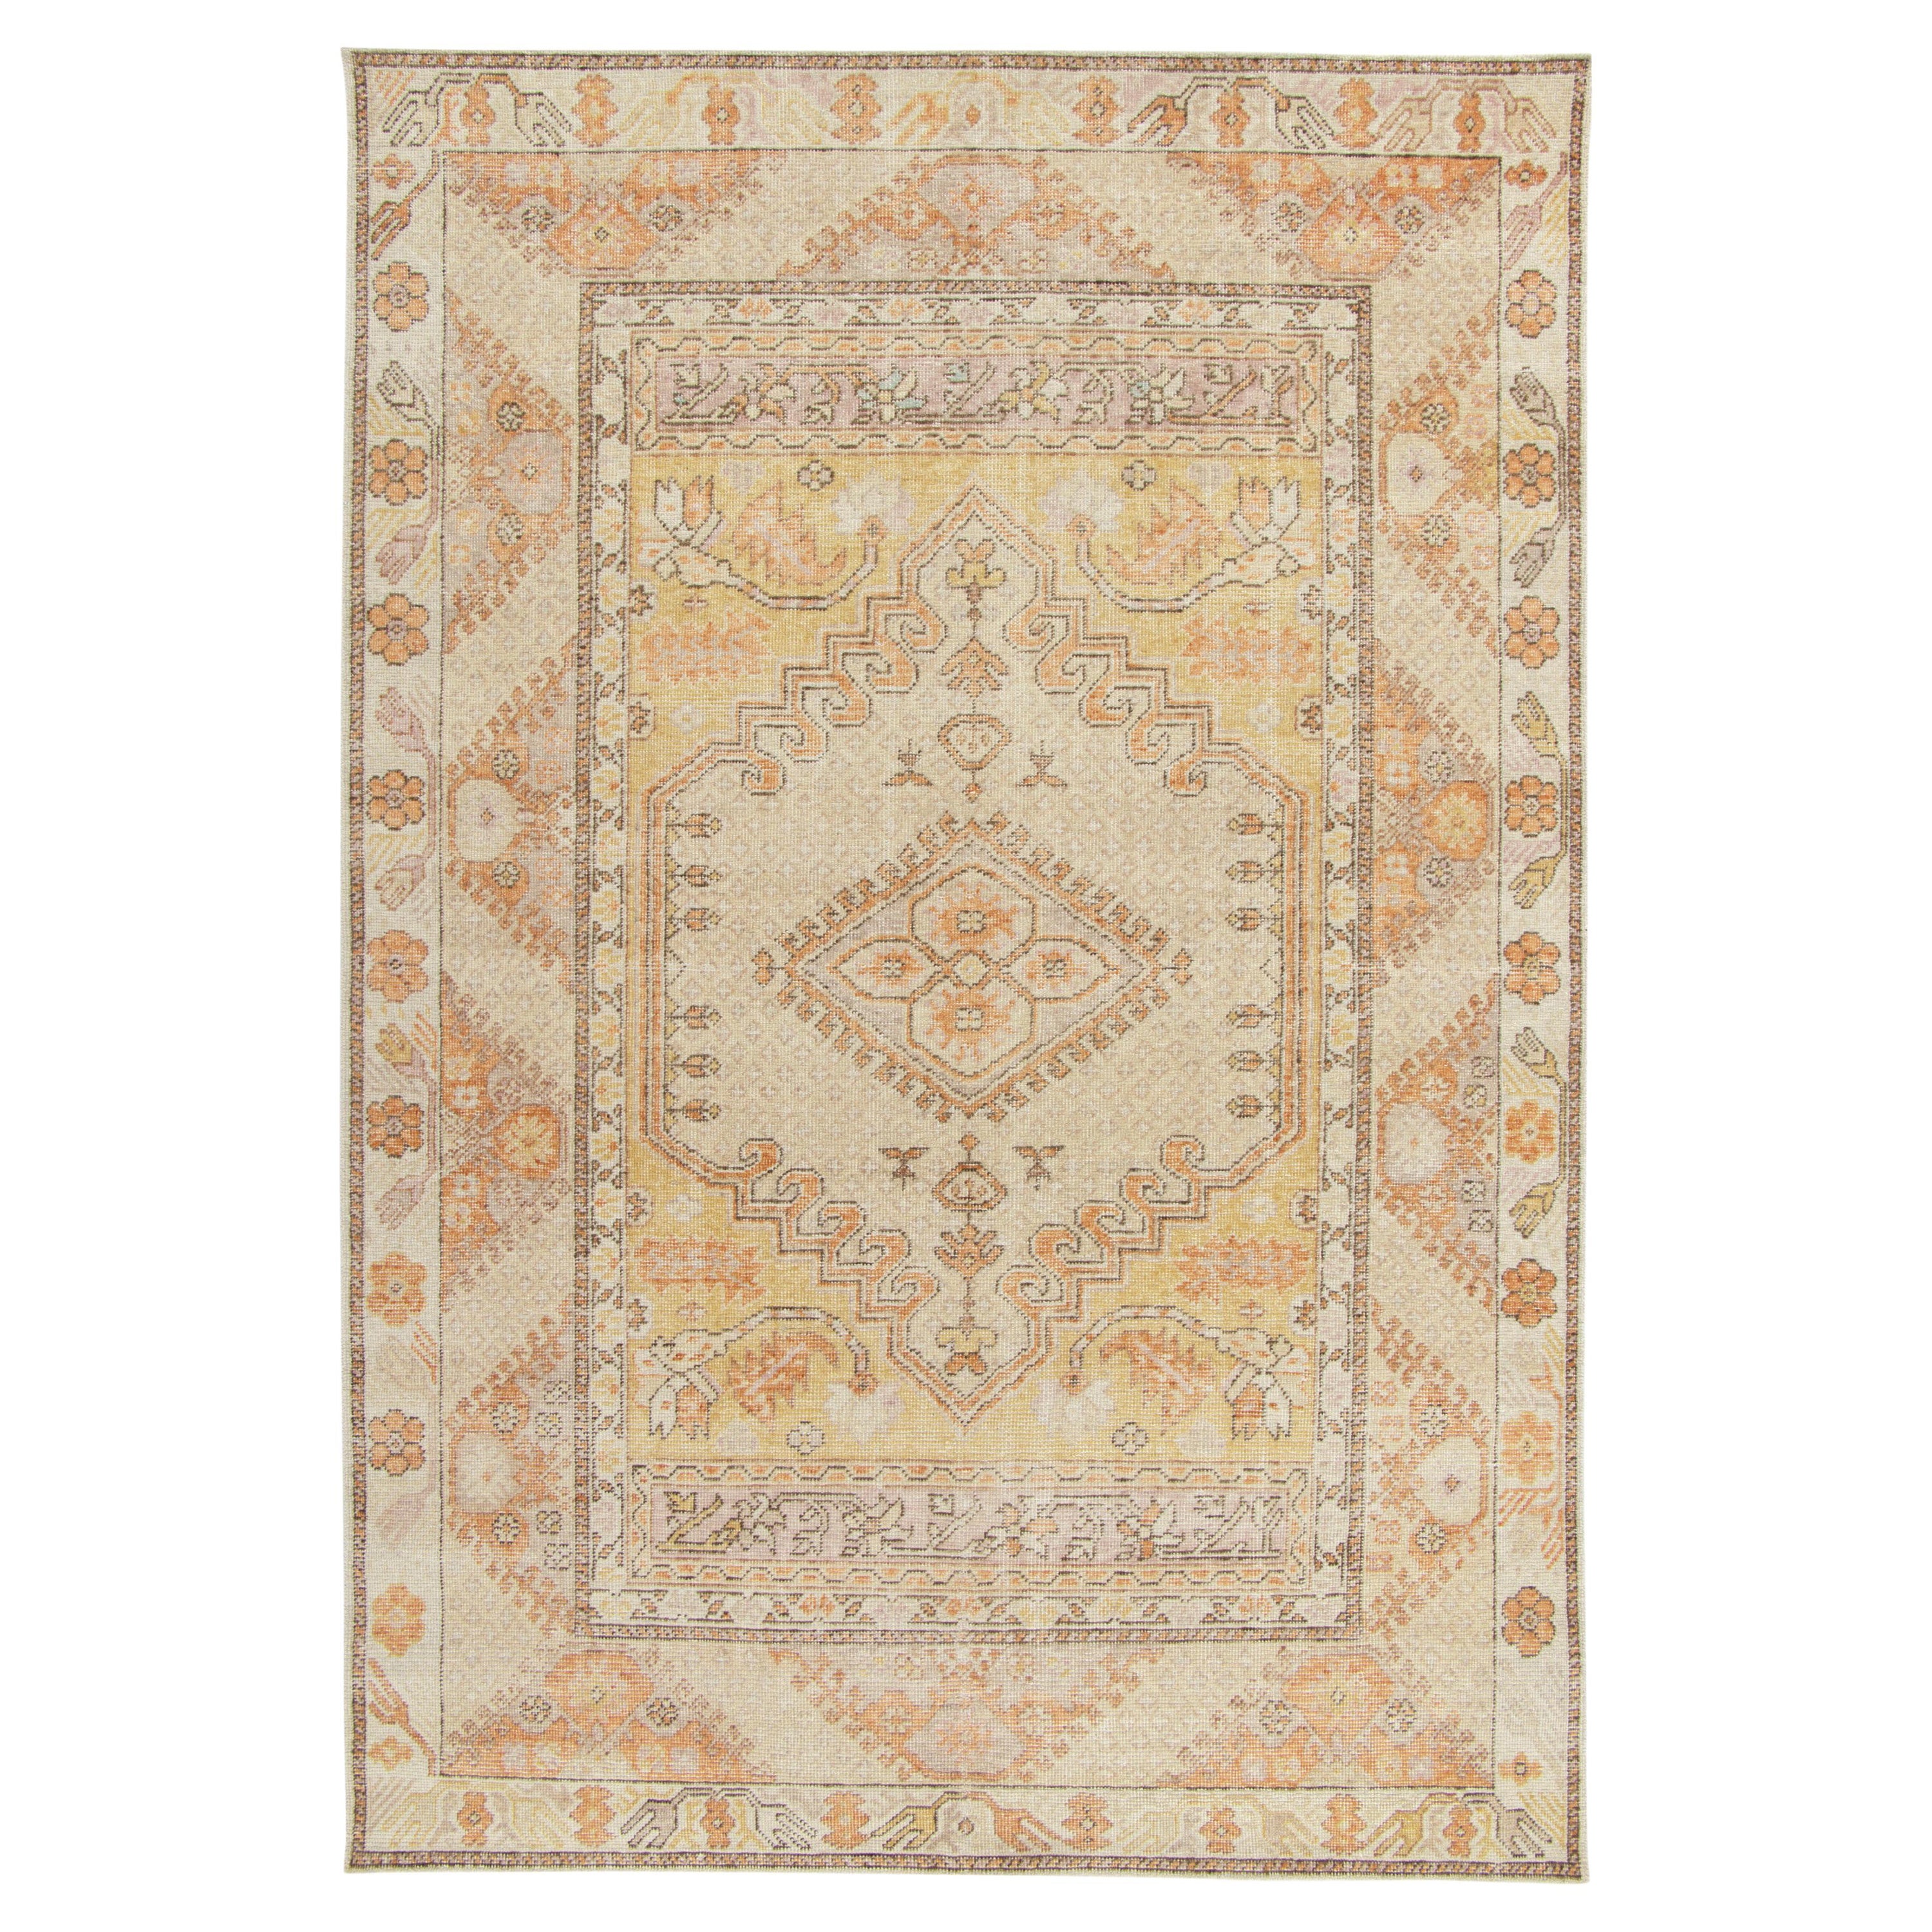 Rug & Kilim's Distressed Classic Style Rug in Cream, Orange Medallion Pattern For Sale